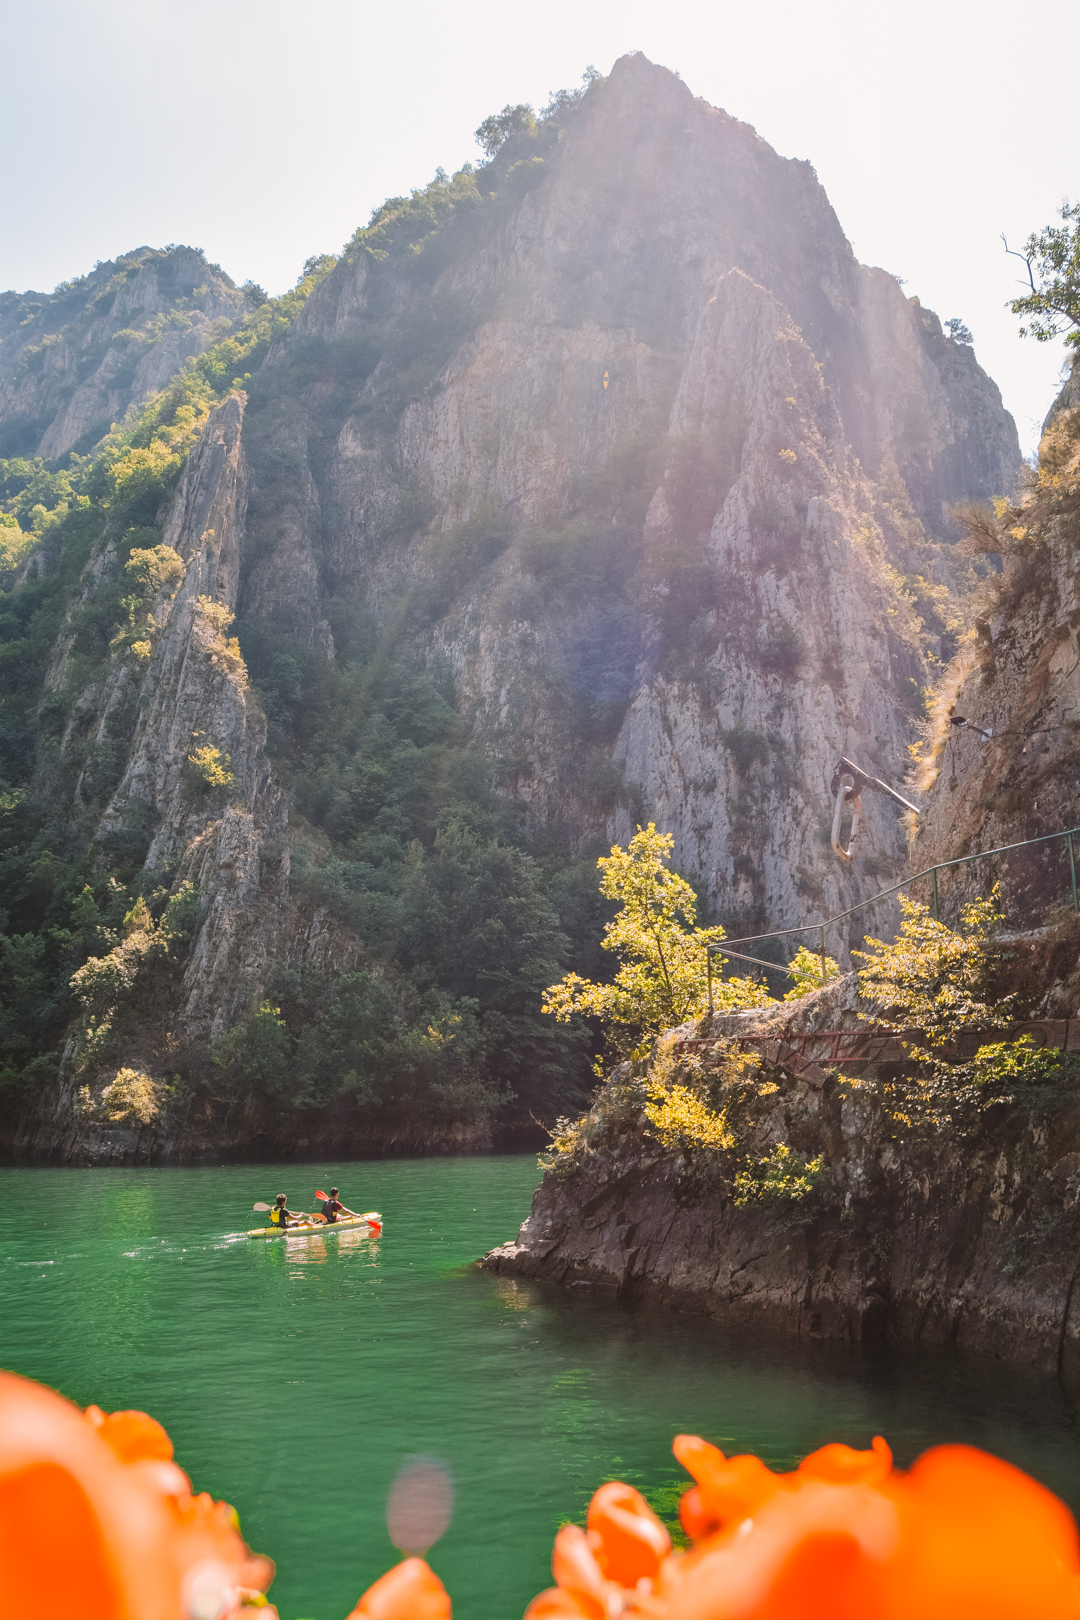 Go on a day trip to Matka Canyon from Skopje